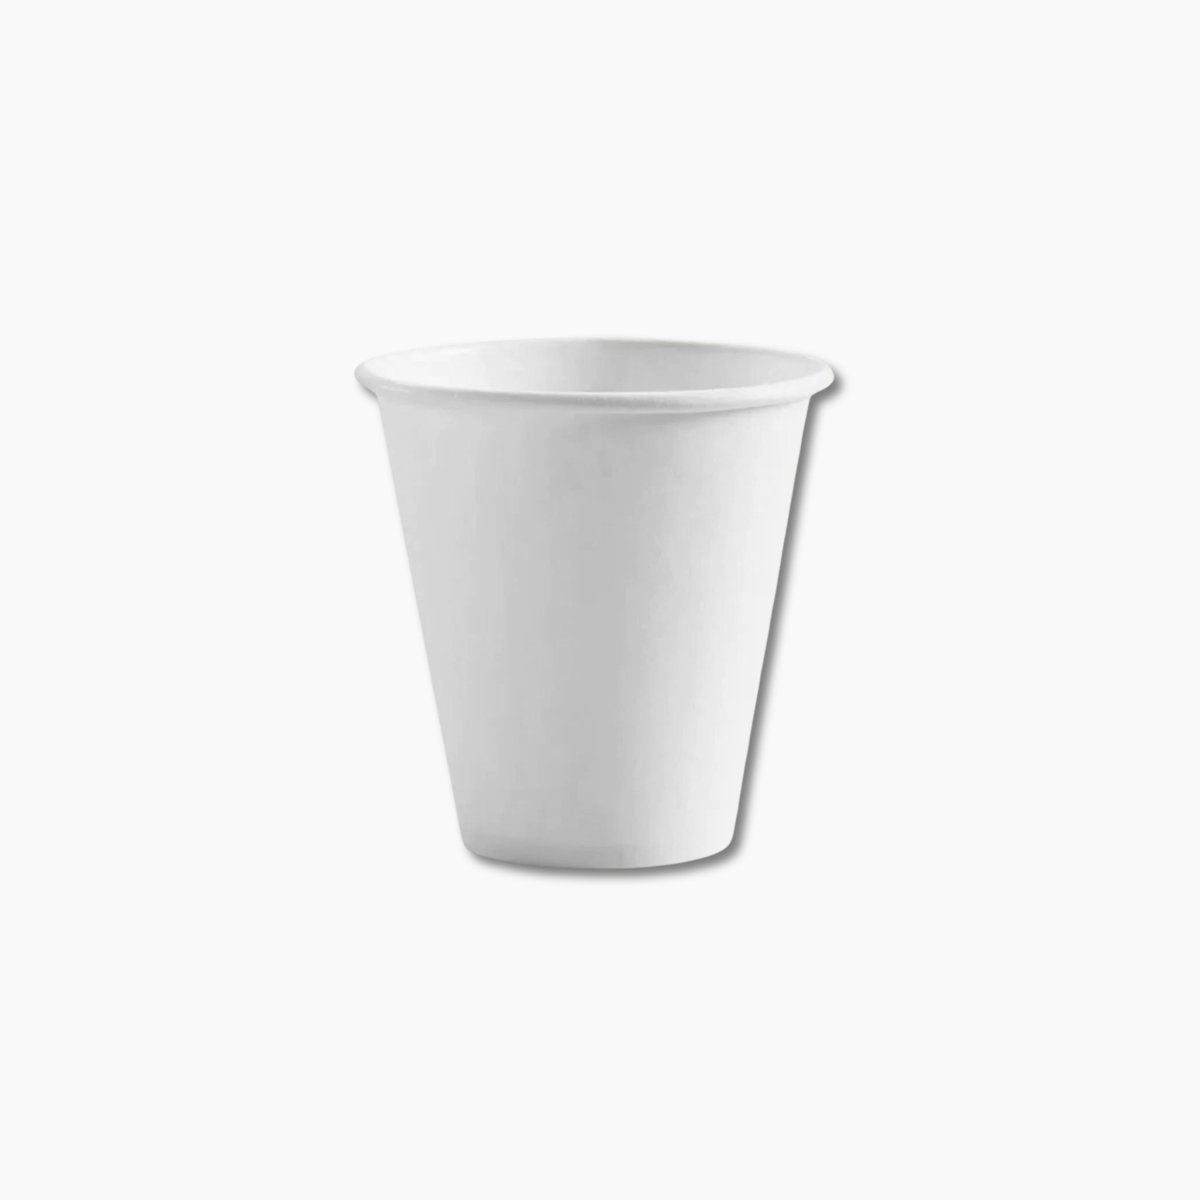 8oz White Coffee Cup - 86mm